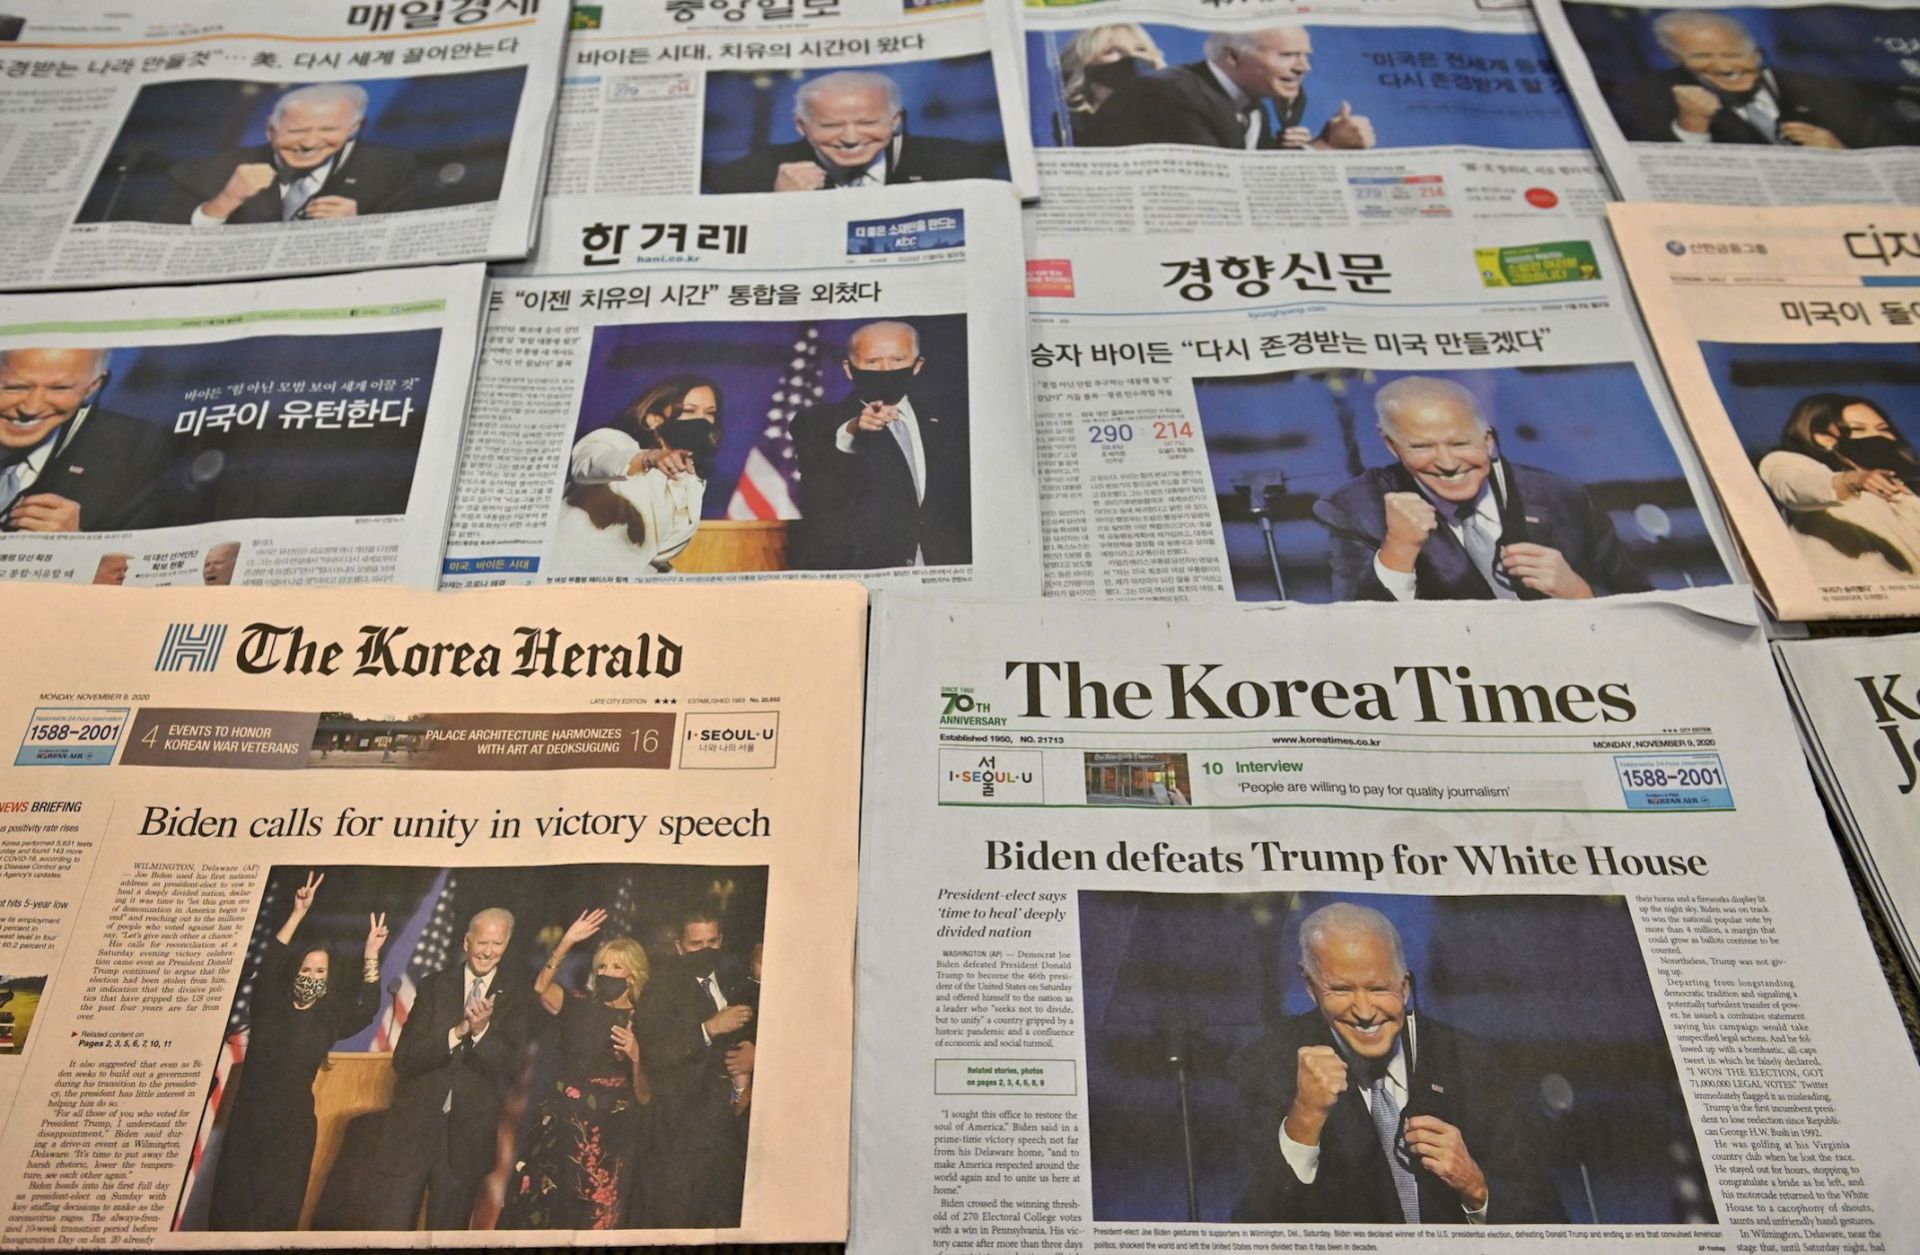 Photos and stories of U.S. President-elect Joe Biden dominate the headlines on the front pages of newspapers in Seoul, South Korea, on Nov. 9, 2020, 